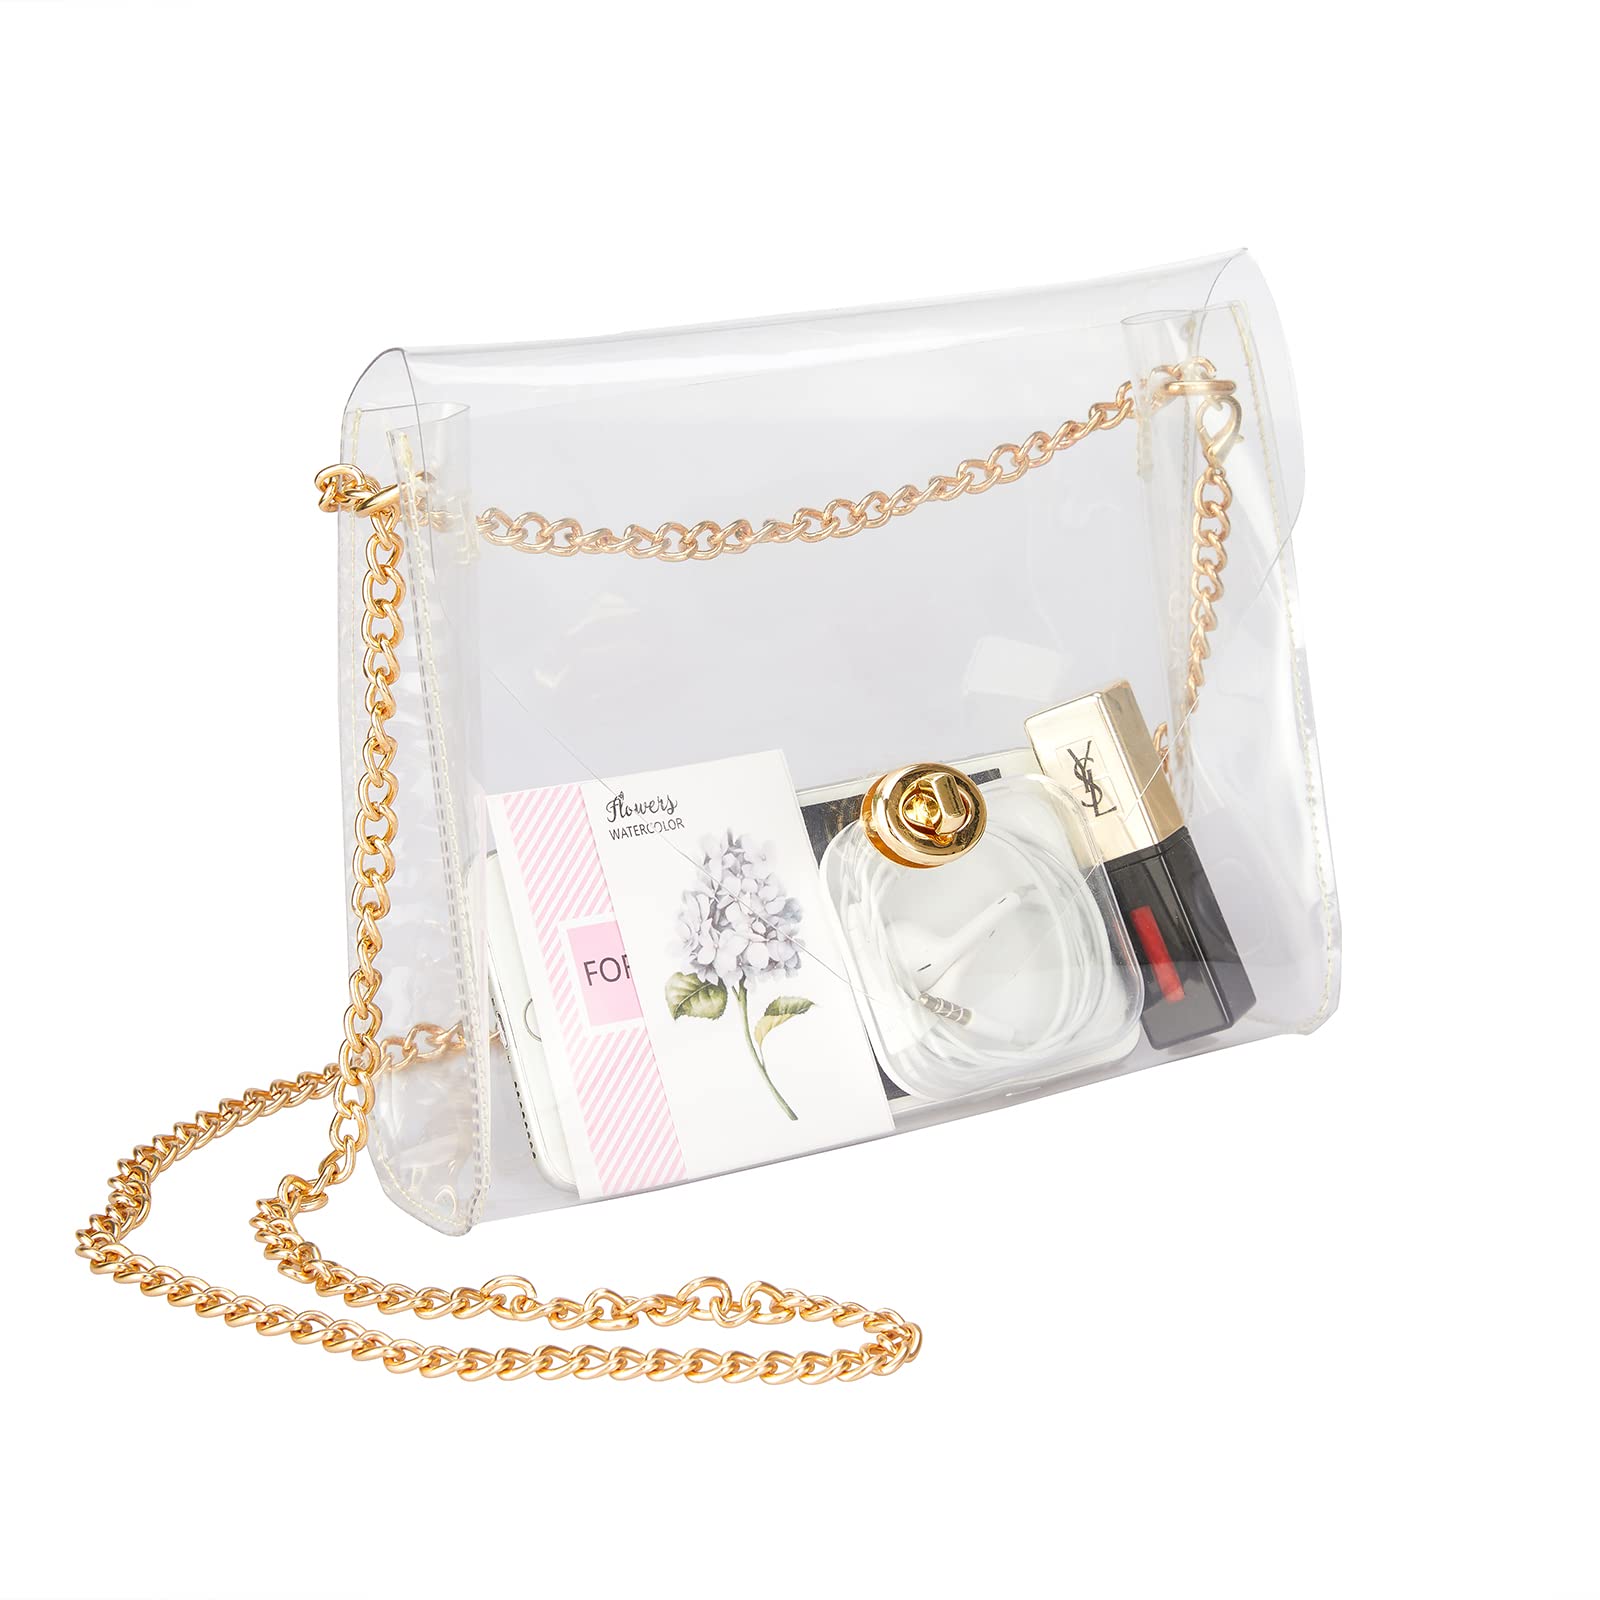 Haoguagua Clear Crossbody Purse Bag, Clear Bag Stadium Approved for Concerts, Festivals, Sports Events